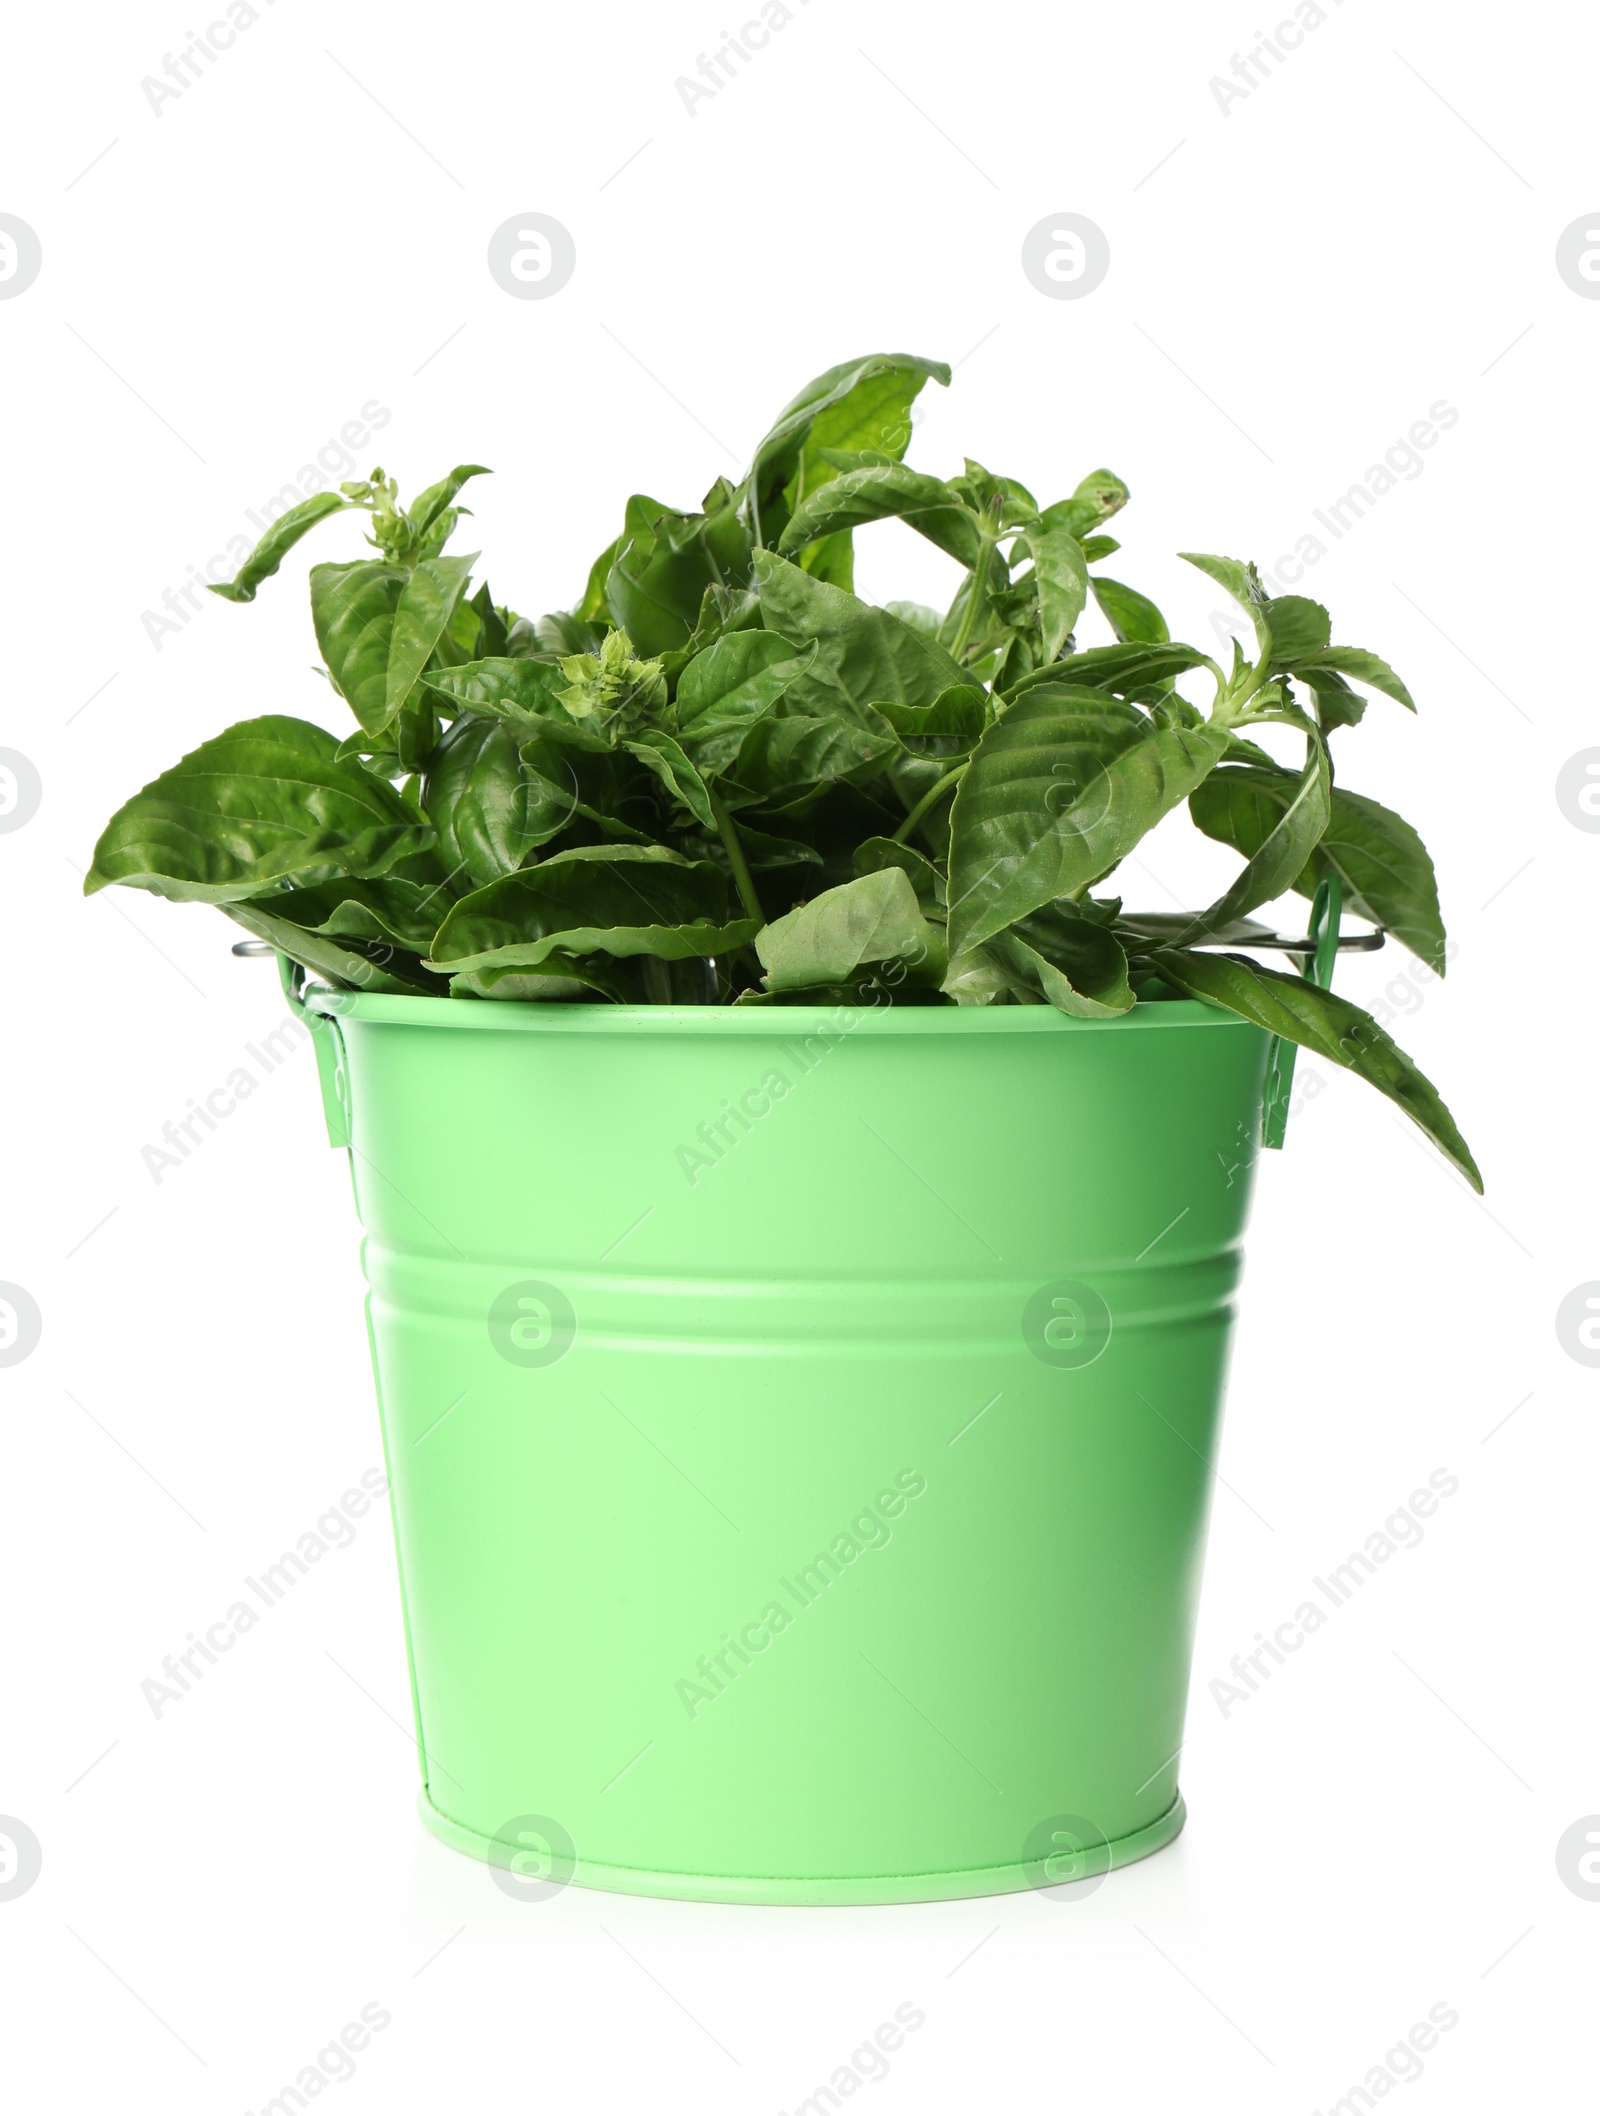 Photo of Lush green basil in bucket isolated on white